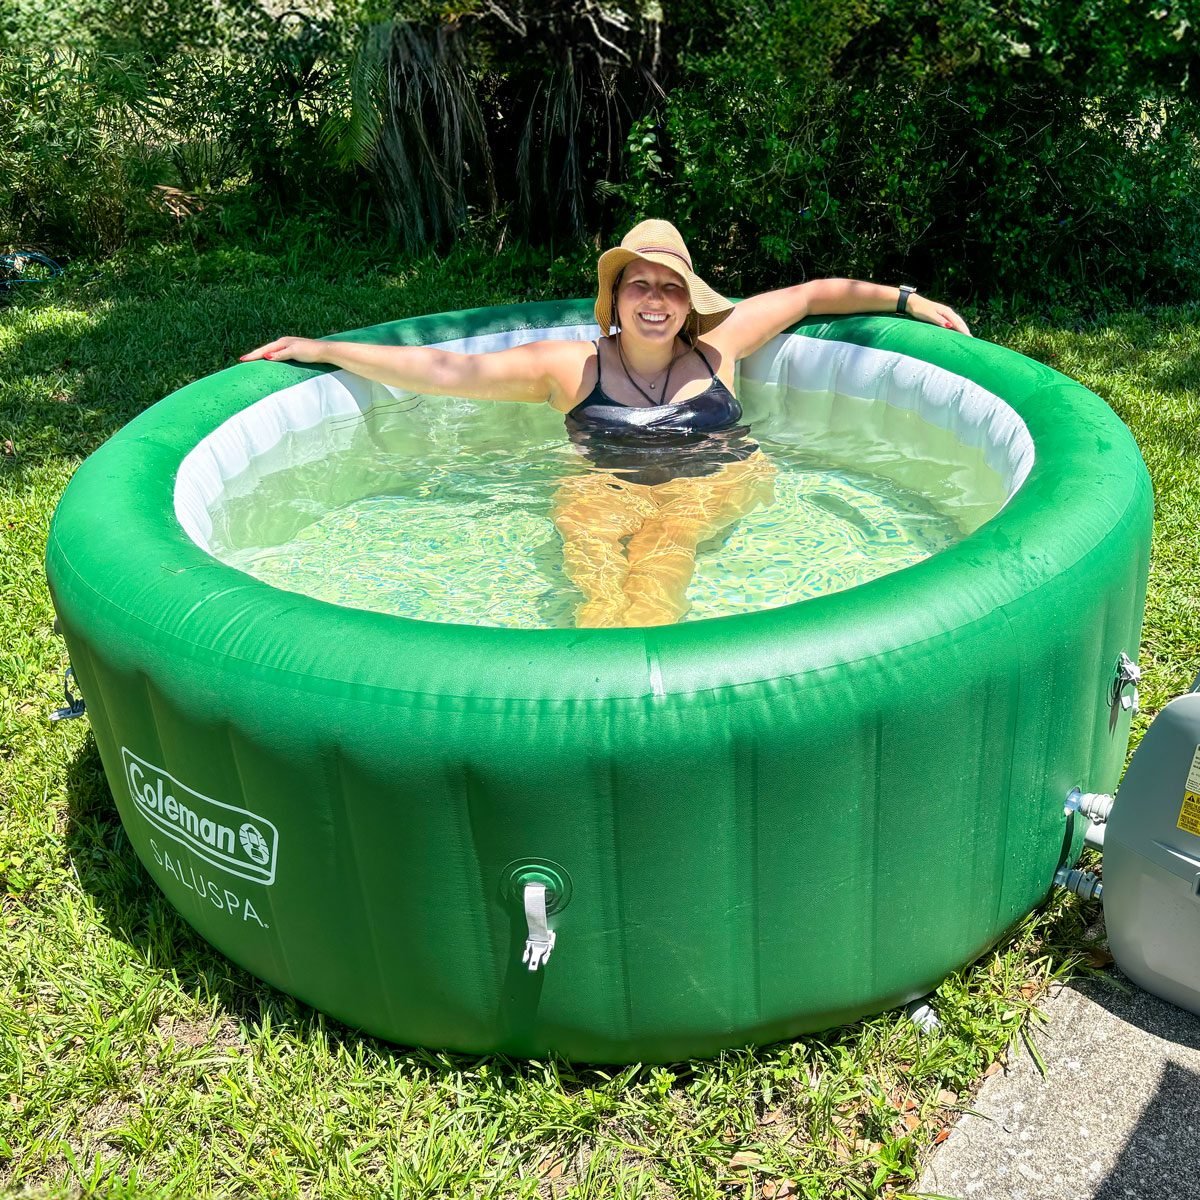 I Tried the Coleman SaluSpa Inflatable Hot Tub—Here's My Unbiased Review